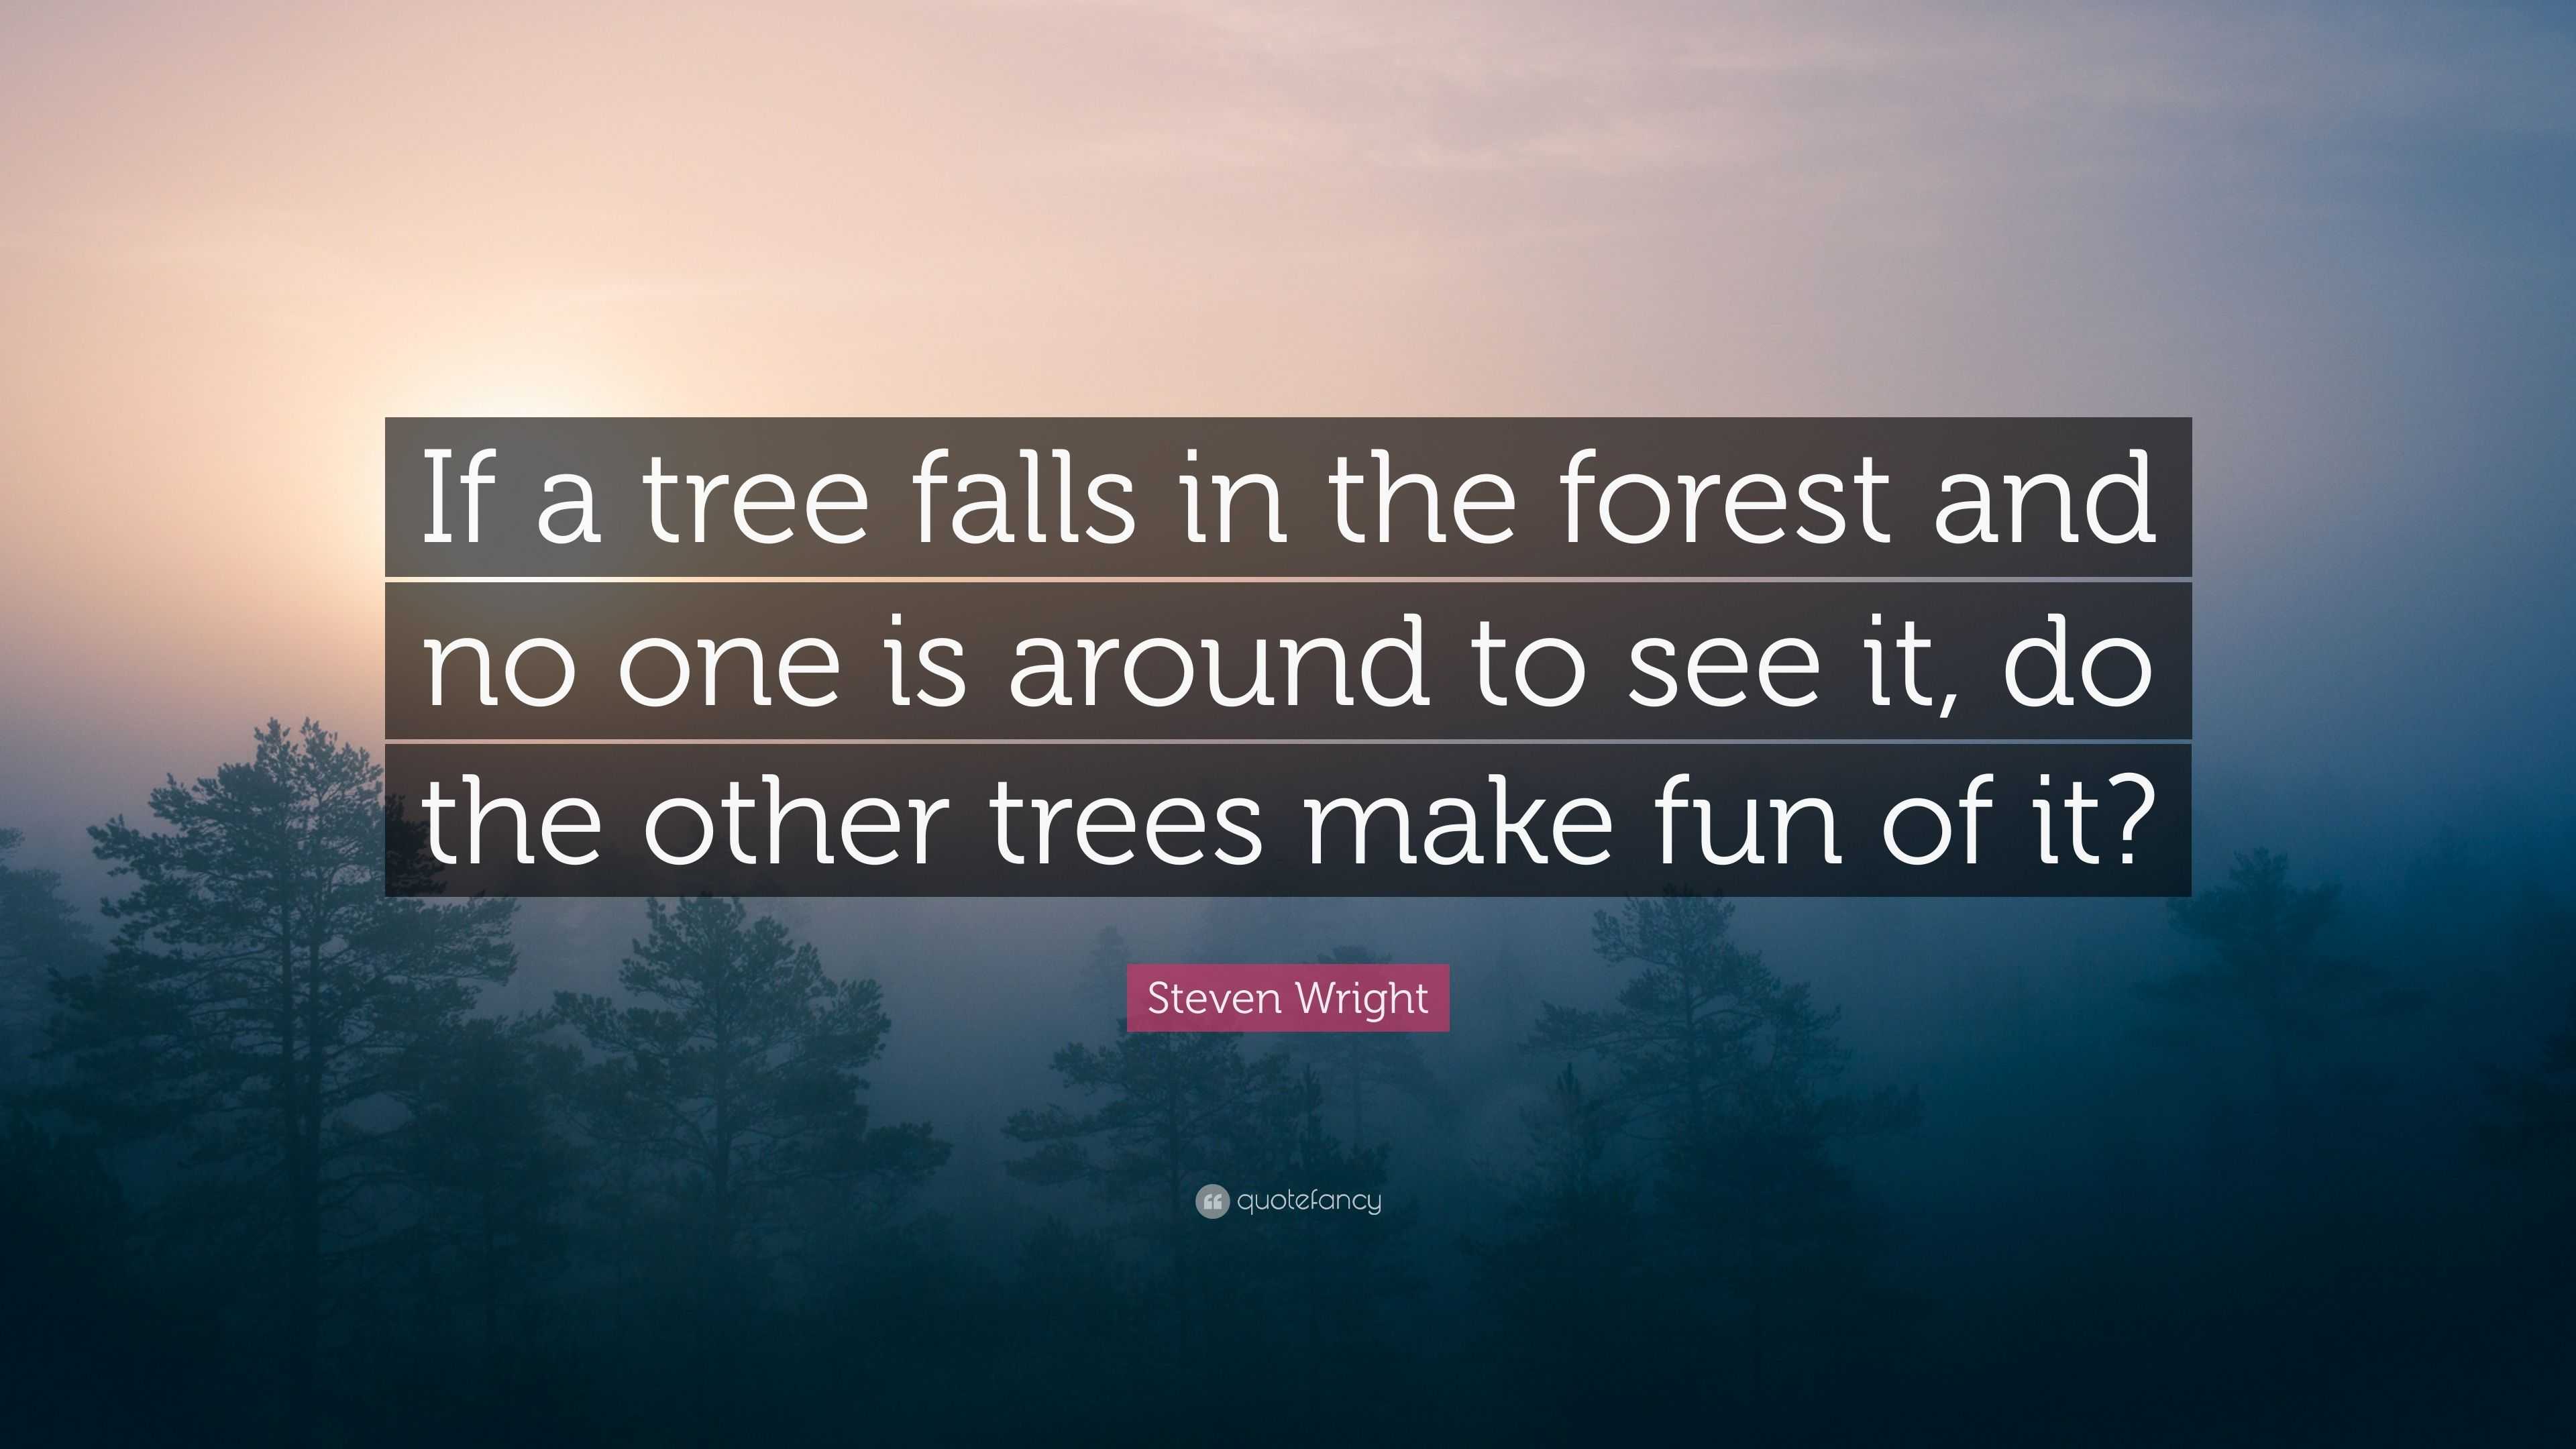 Steven Wright Quote “If a tree falls in the forest and no one is